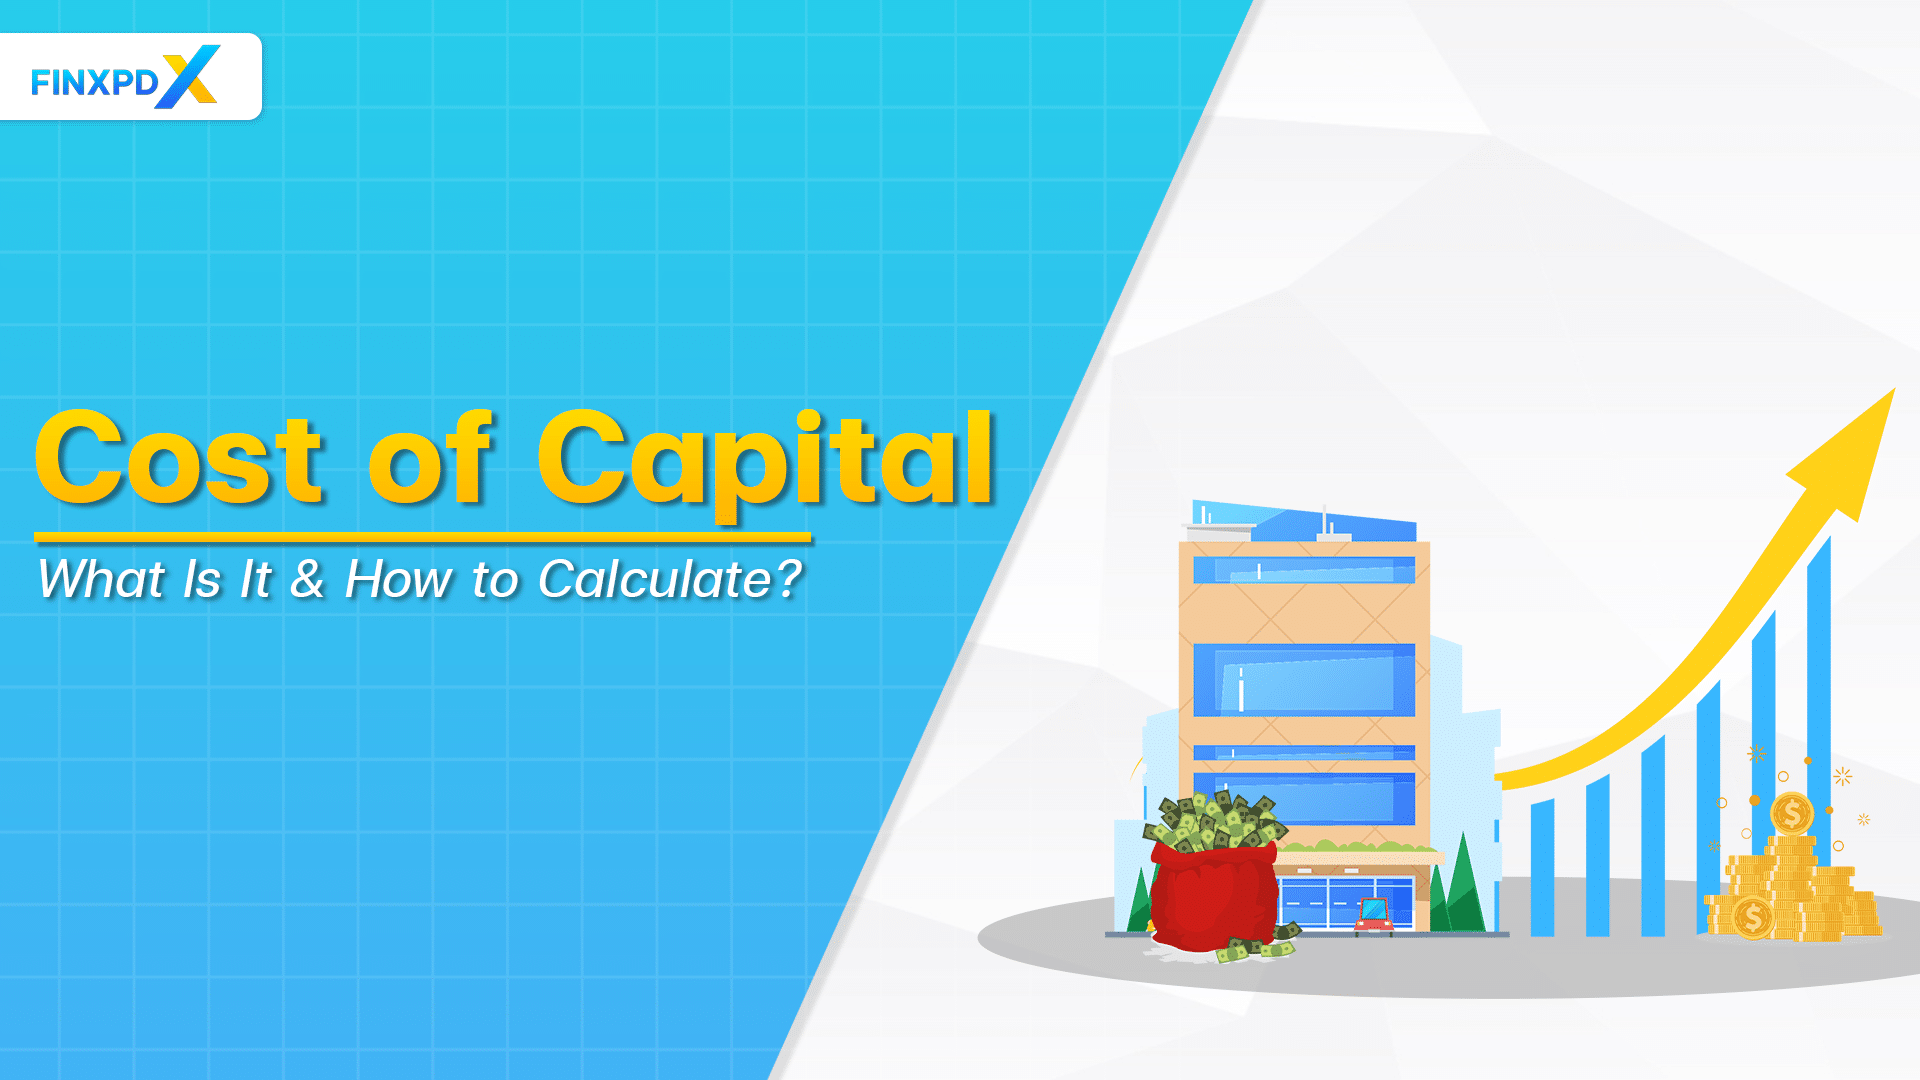 What is cost of capital